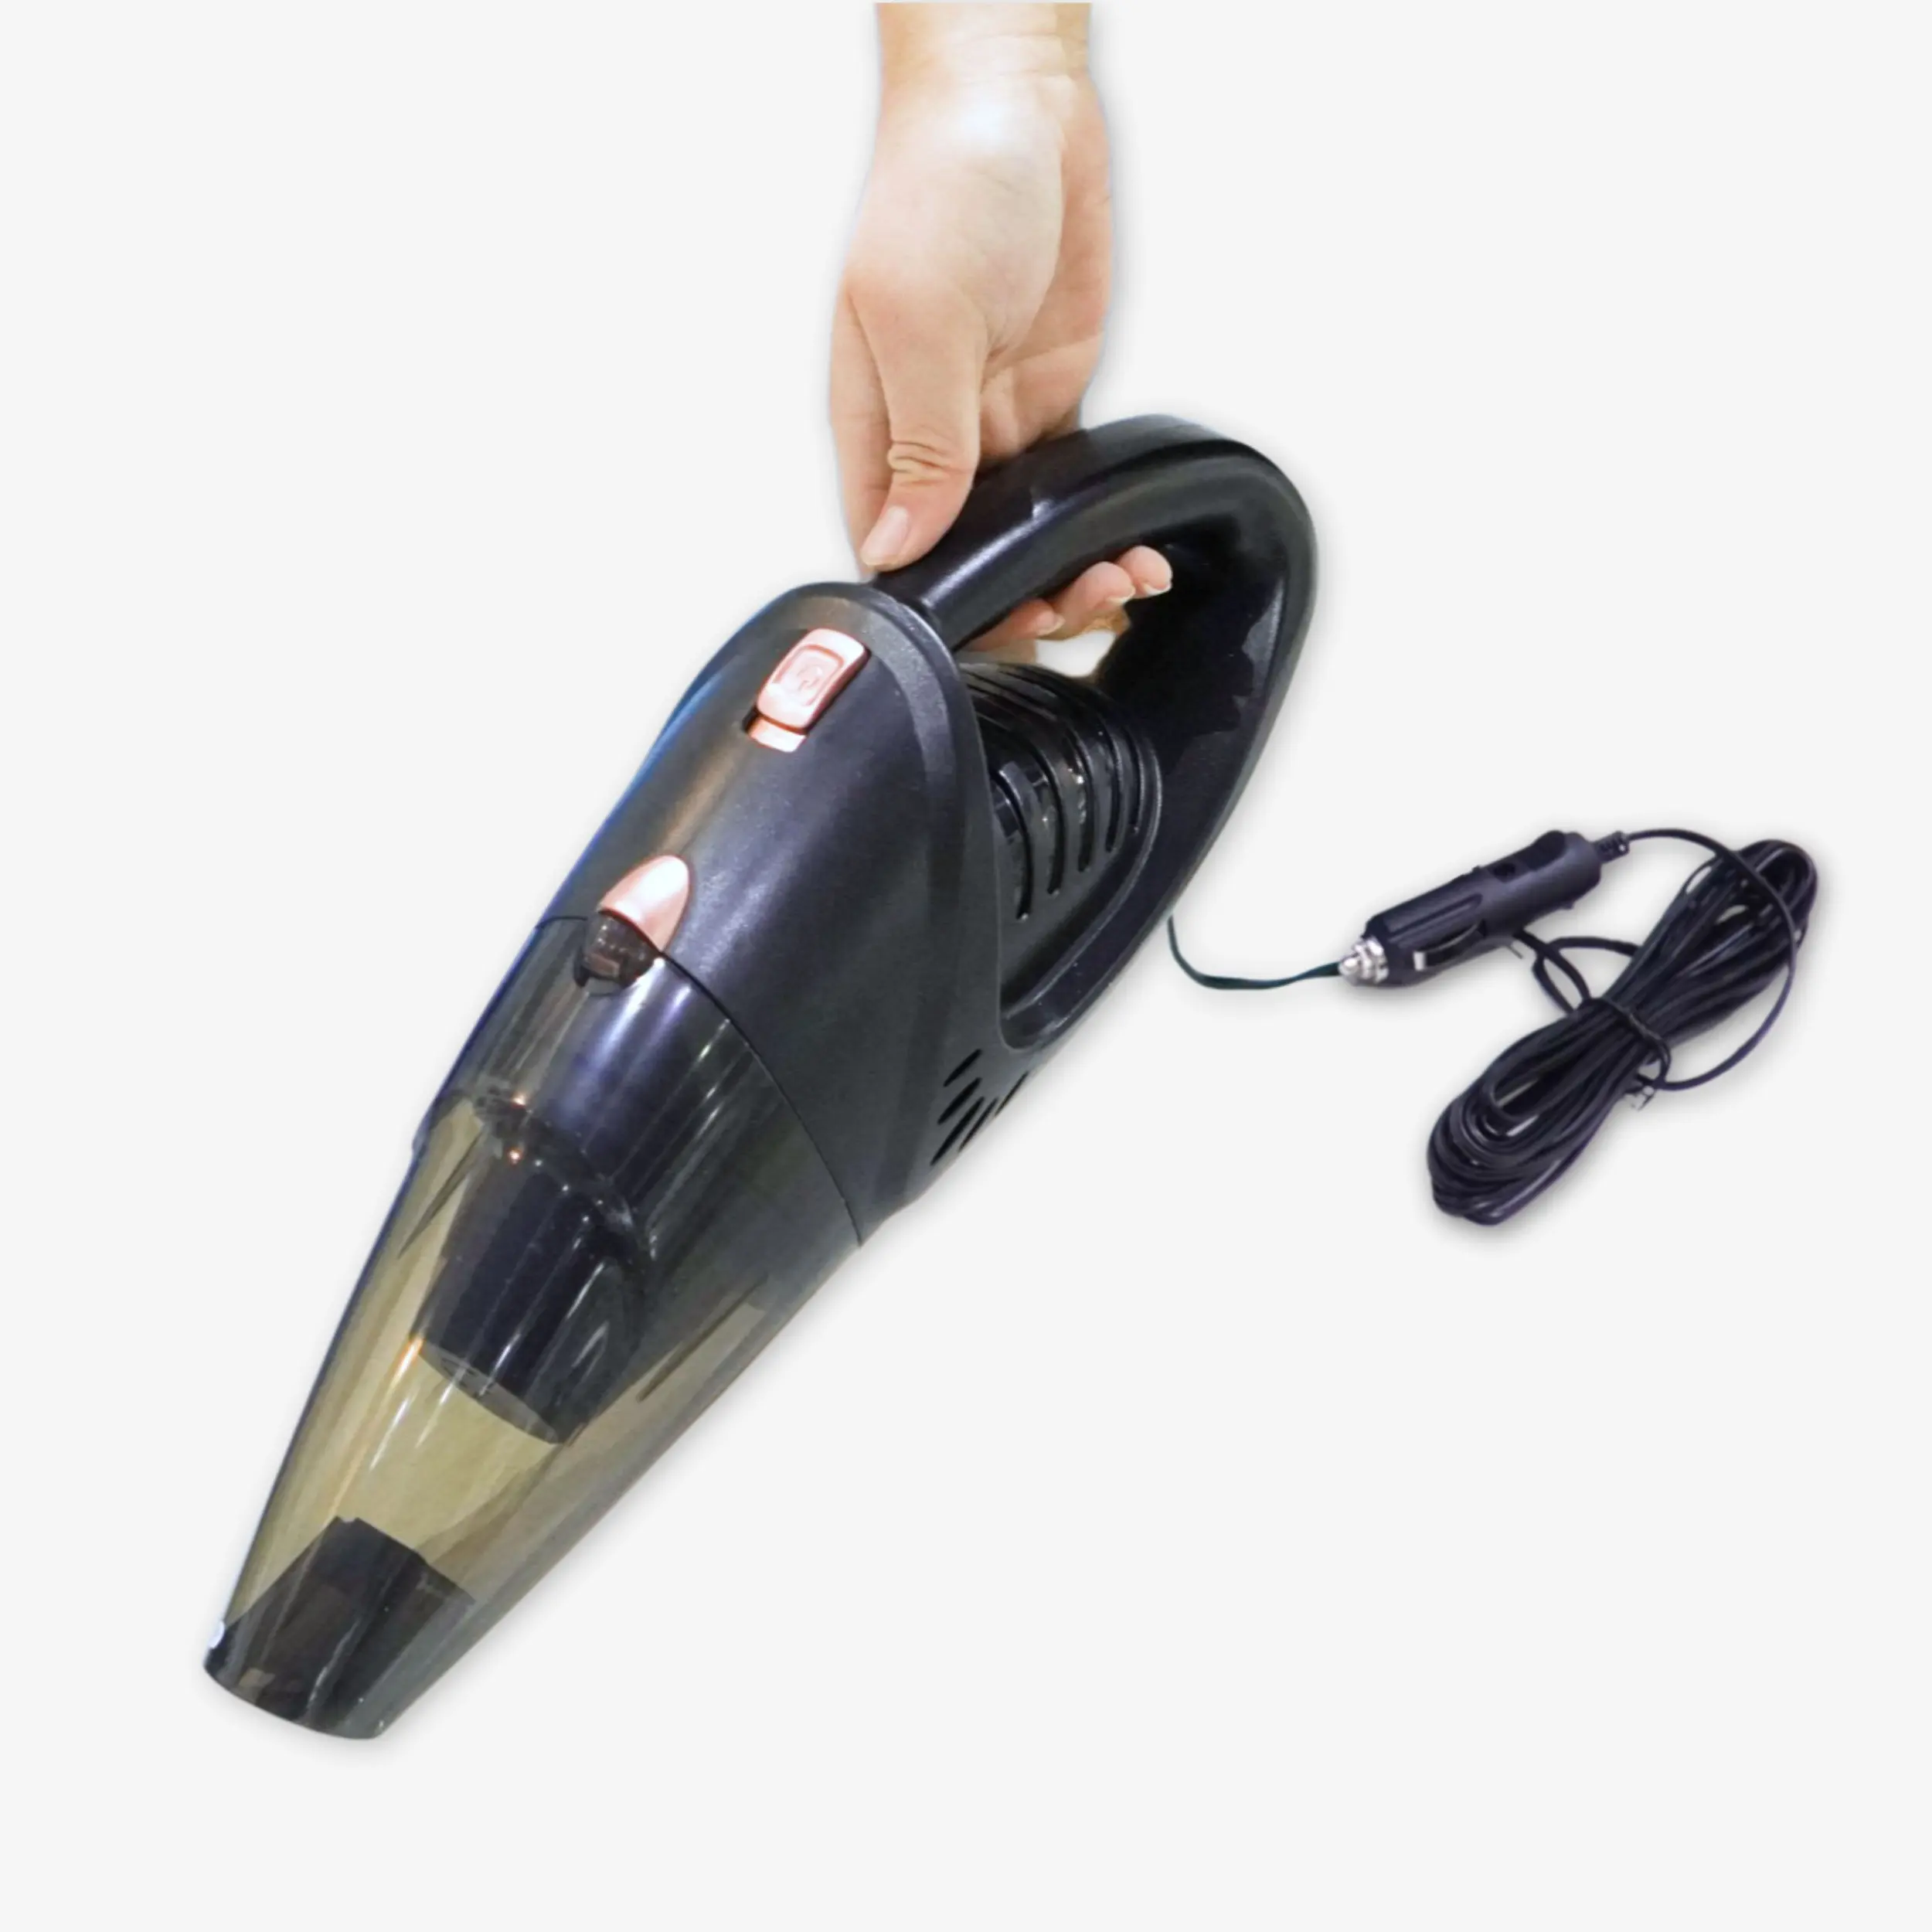 4600pa Handheld Wet and Dry Small Handy Desktop Wired Vacuum Cleaner Car Battery Brushless Motor 12V CE Certificate BLDC 2500mah